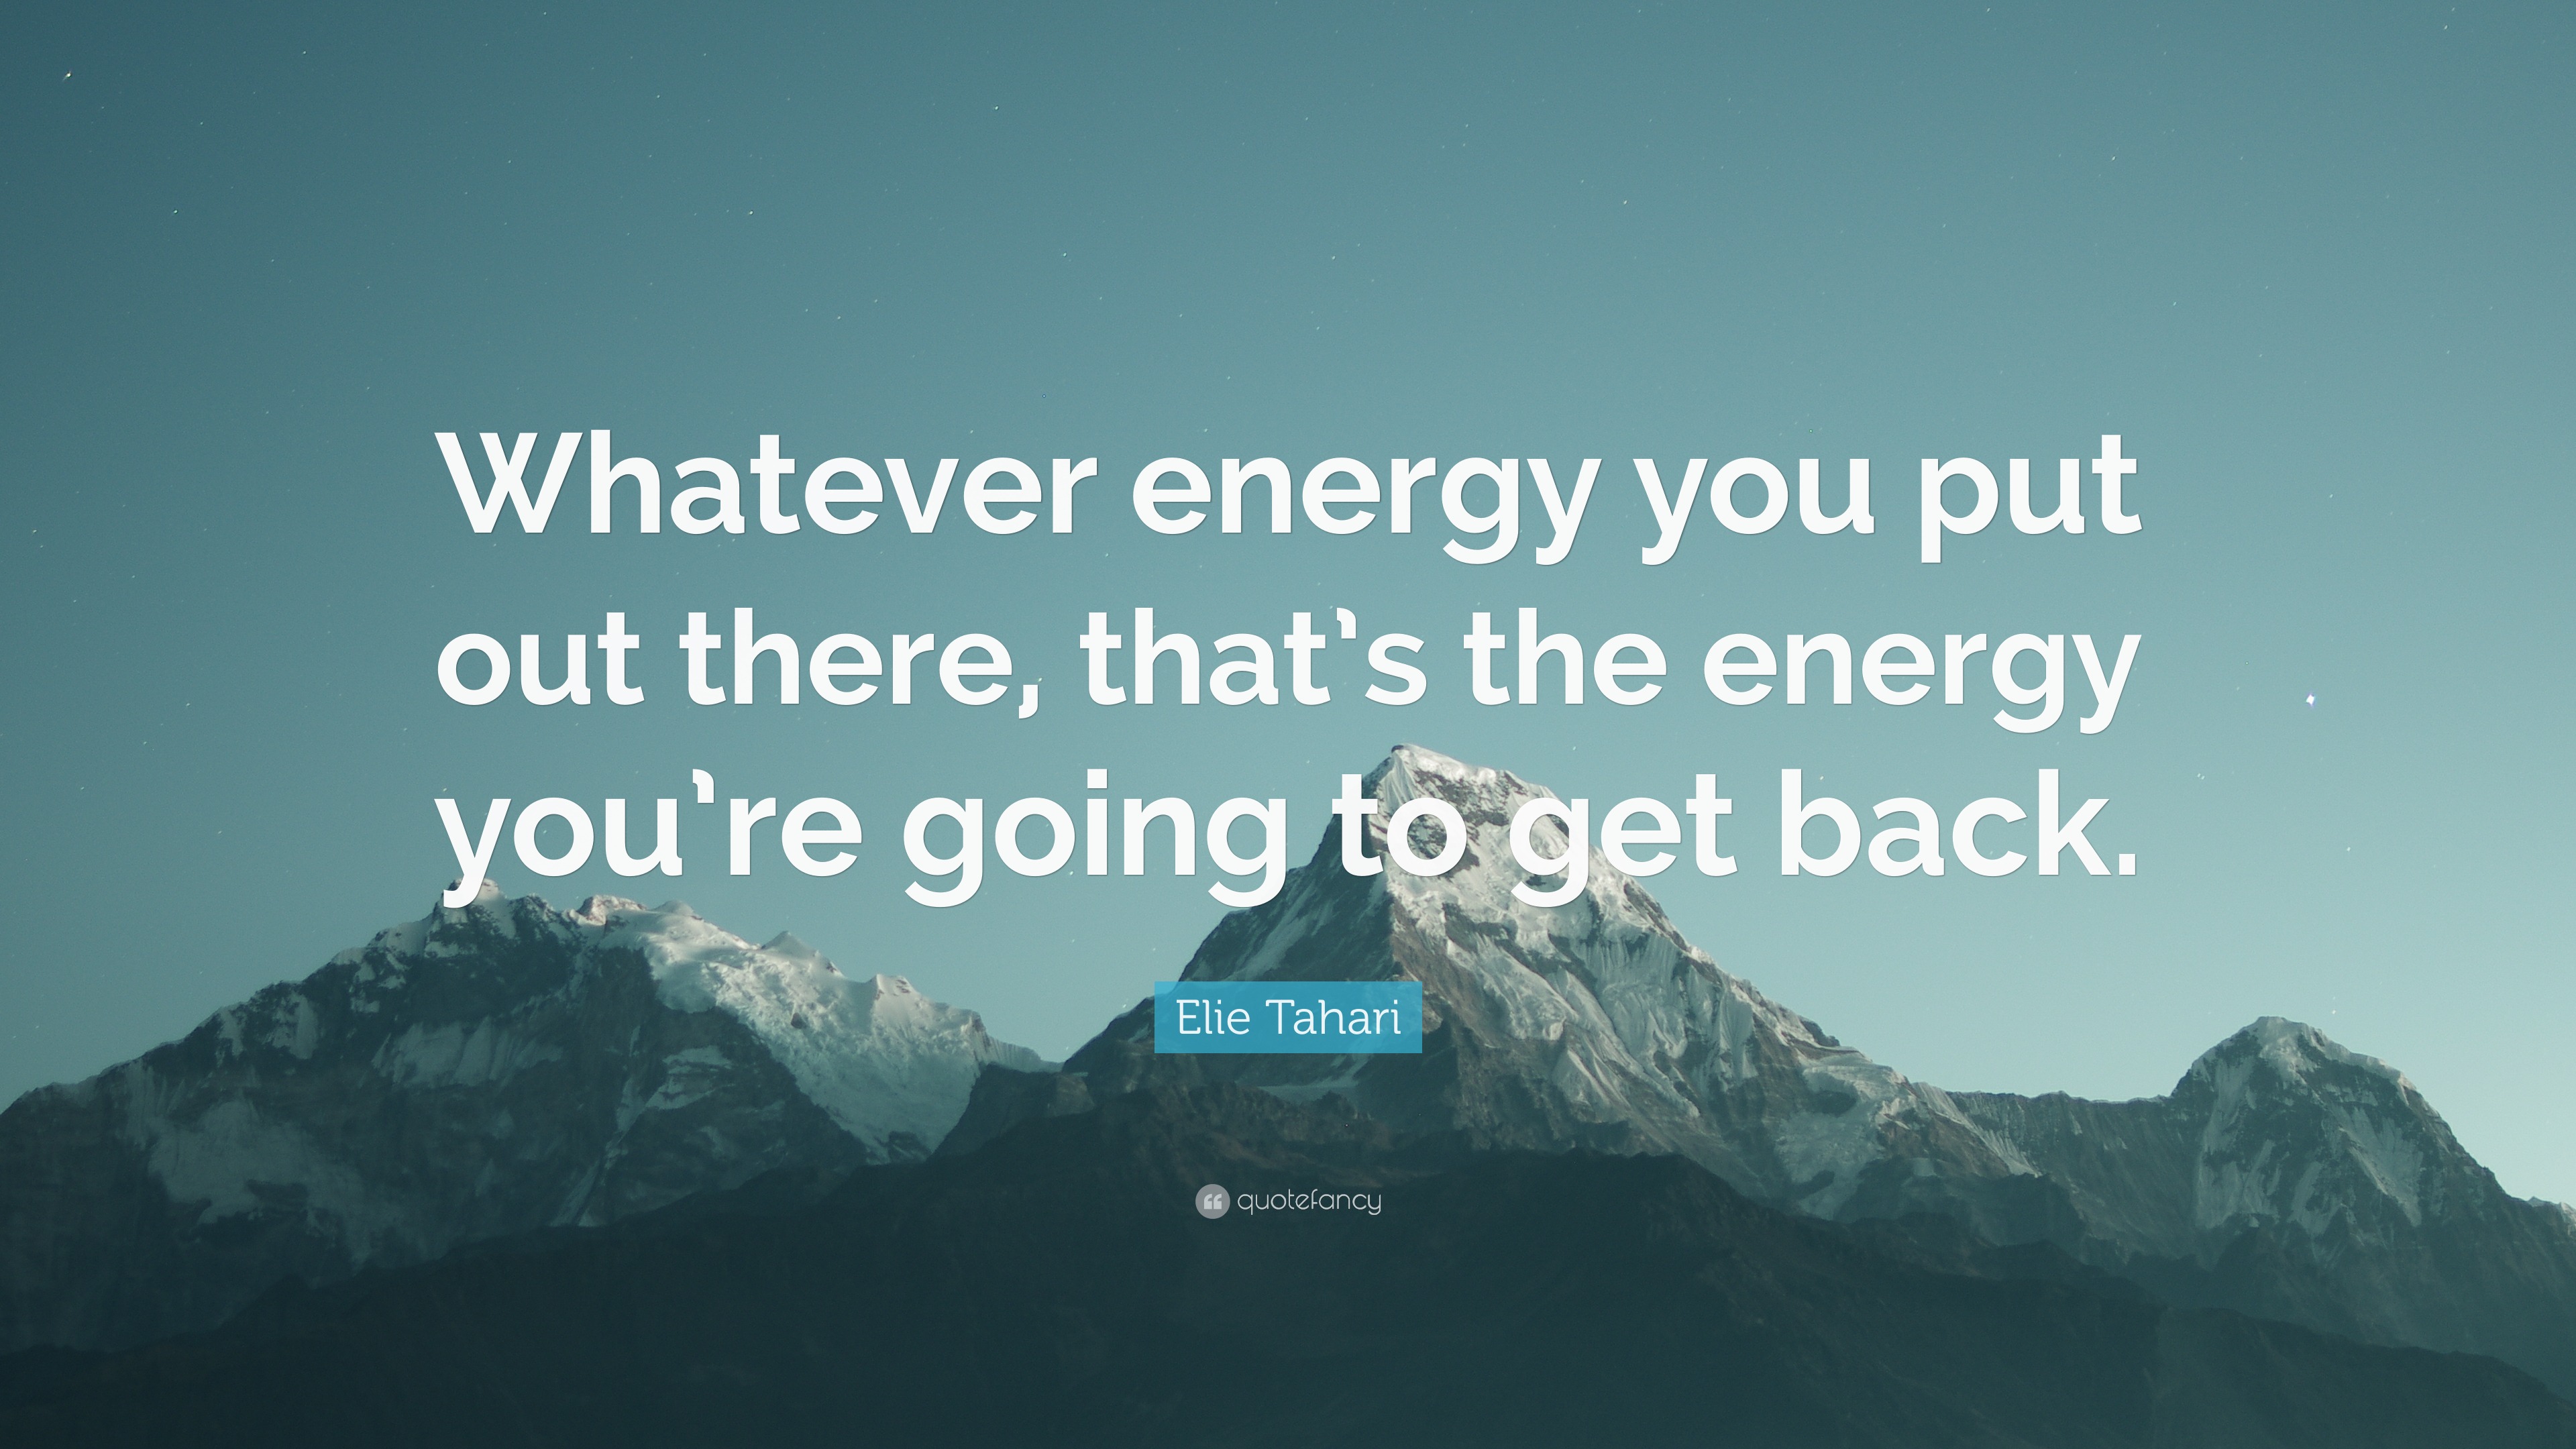 Elie Tahari Quote: “Whatever energy you put out there, that’s the ...